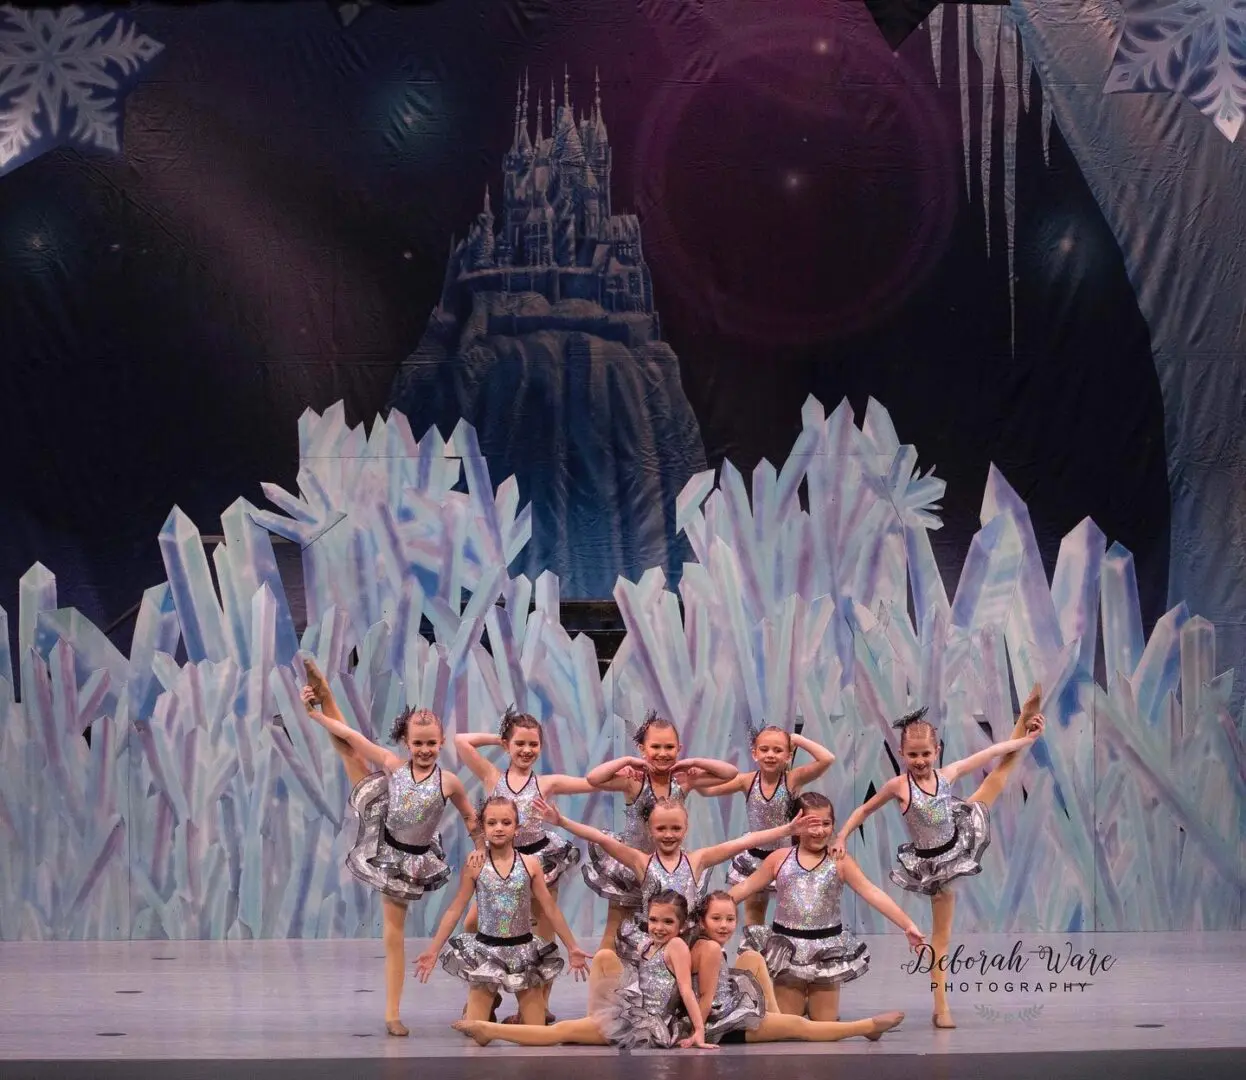 A group of dancers in front of a frozen scene.